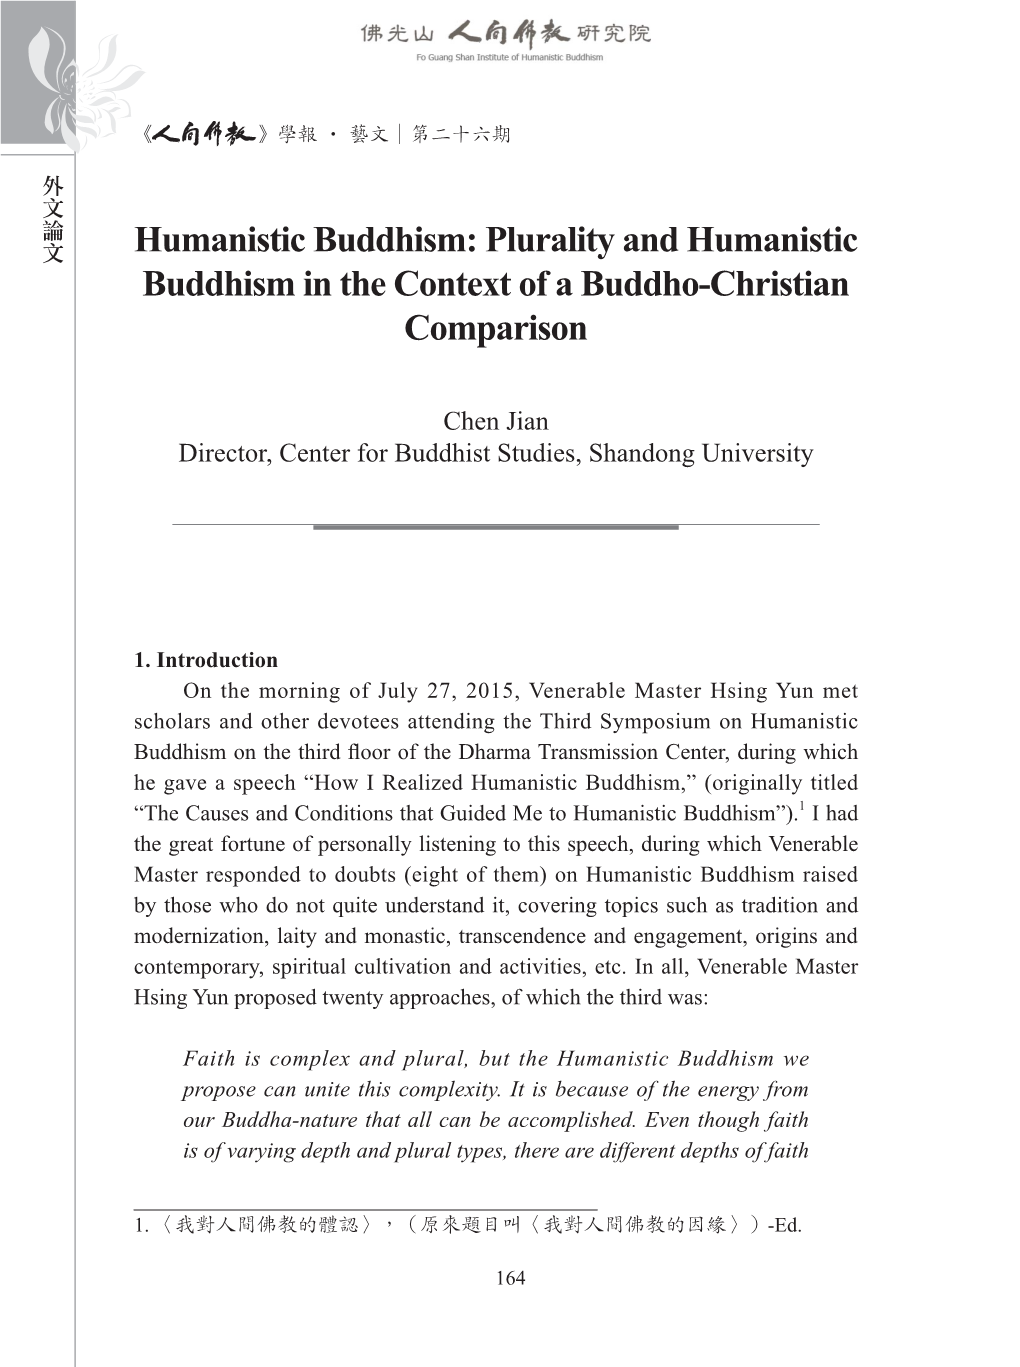 Humanistic Buddhism: Plurality and Humanistic Buddhism in the Context of a Buddho-Christian Comparison